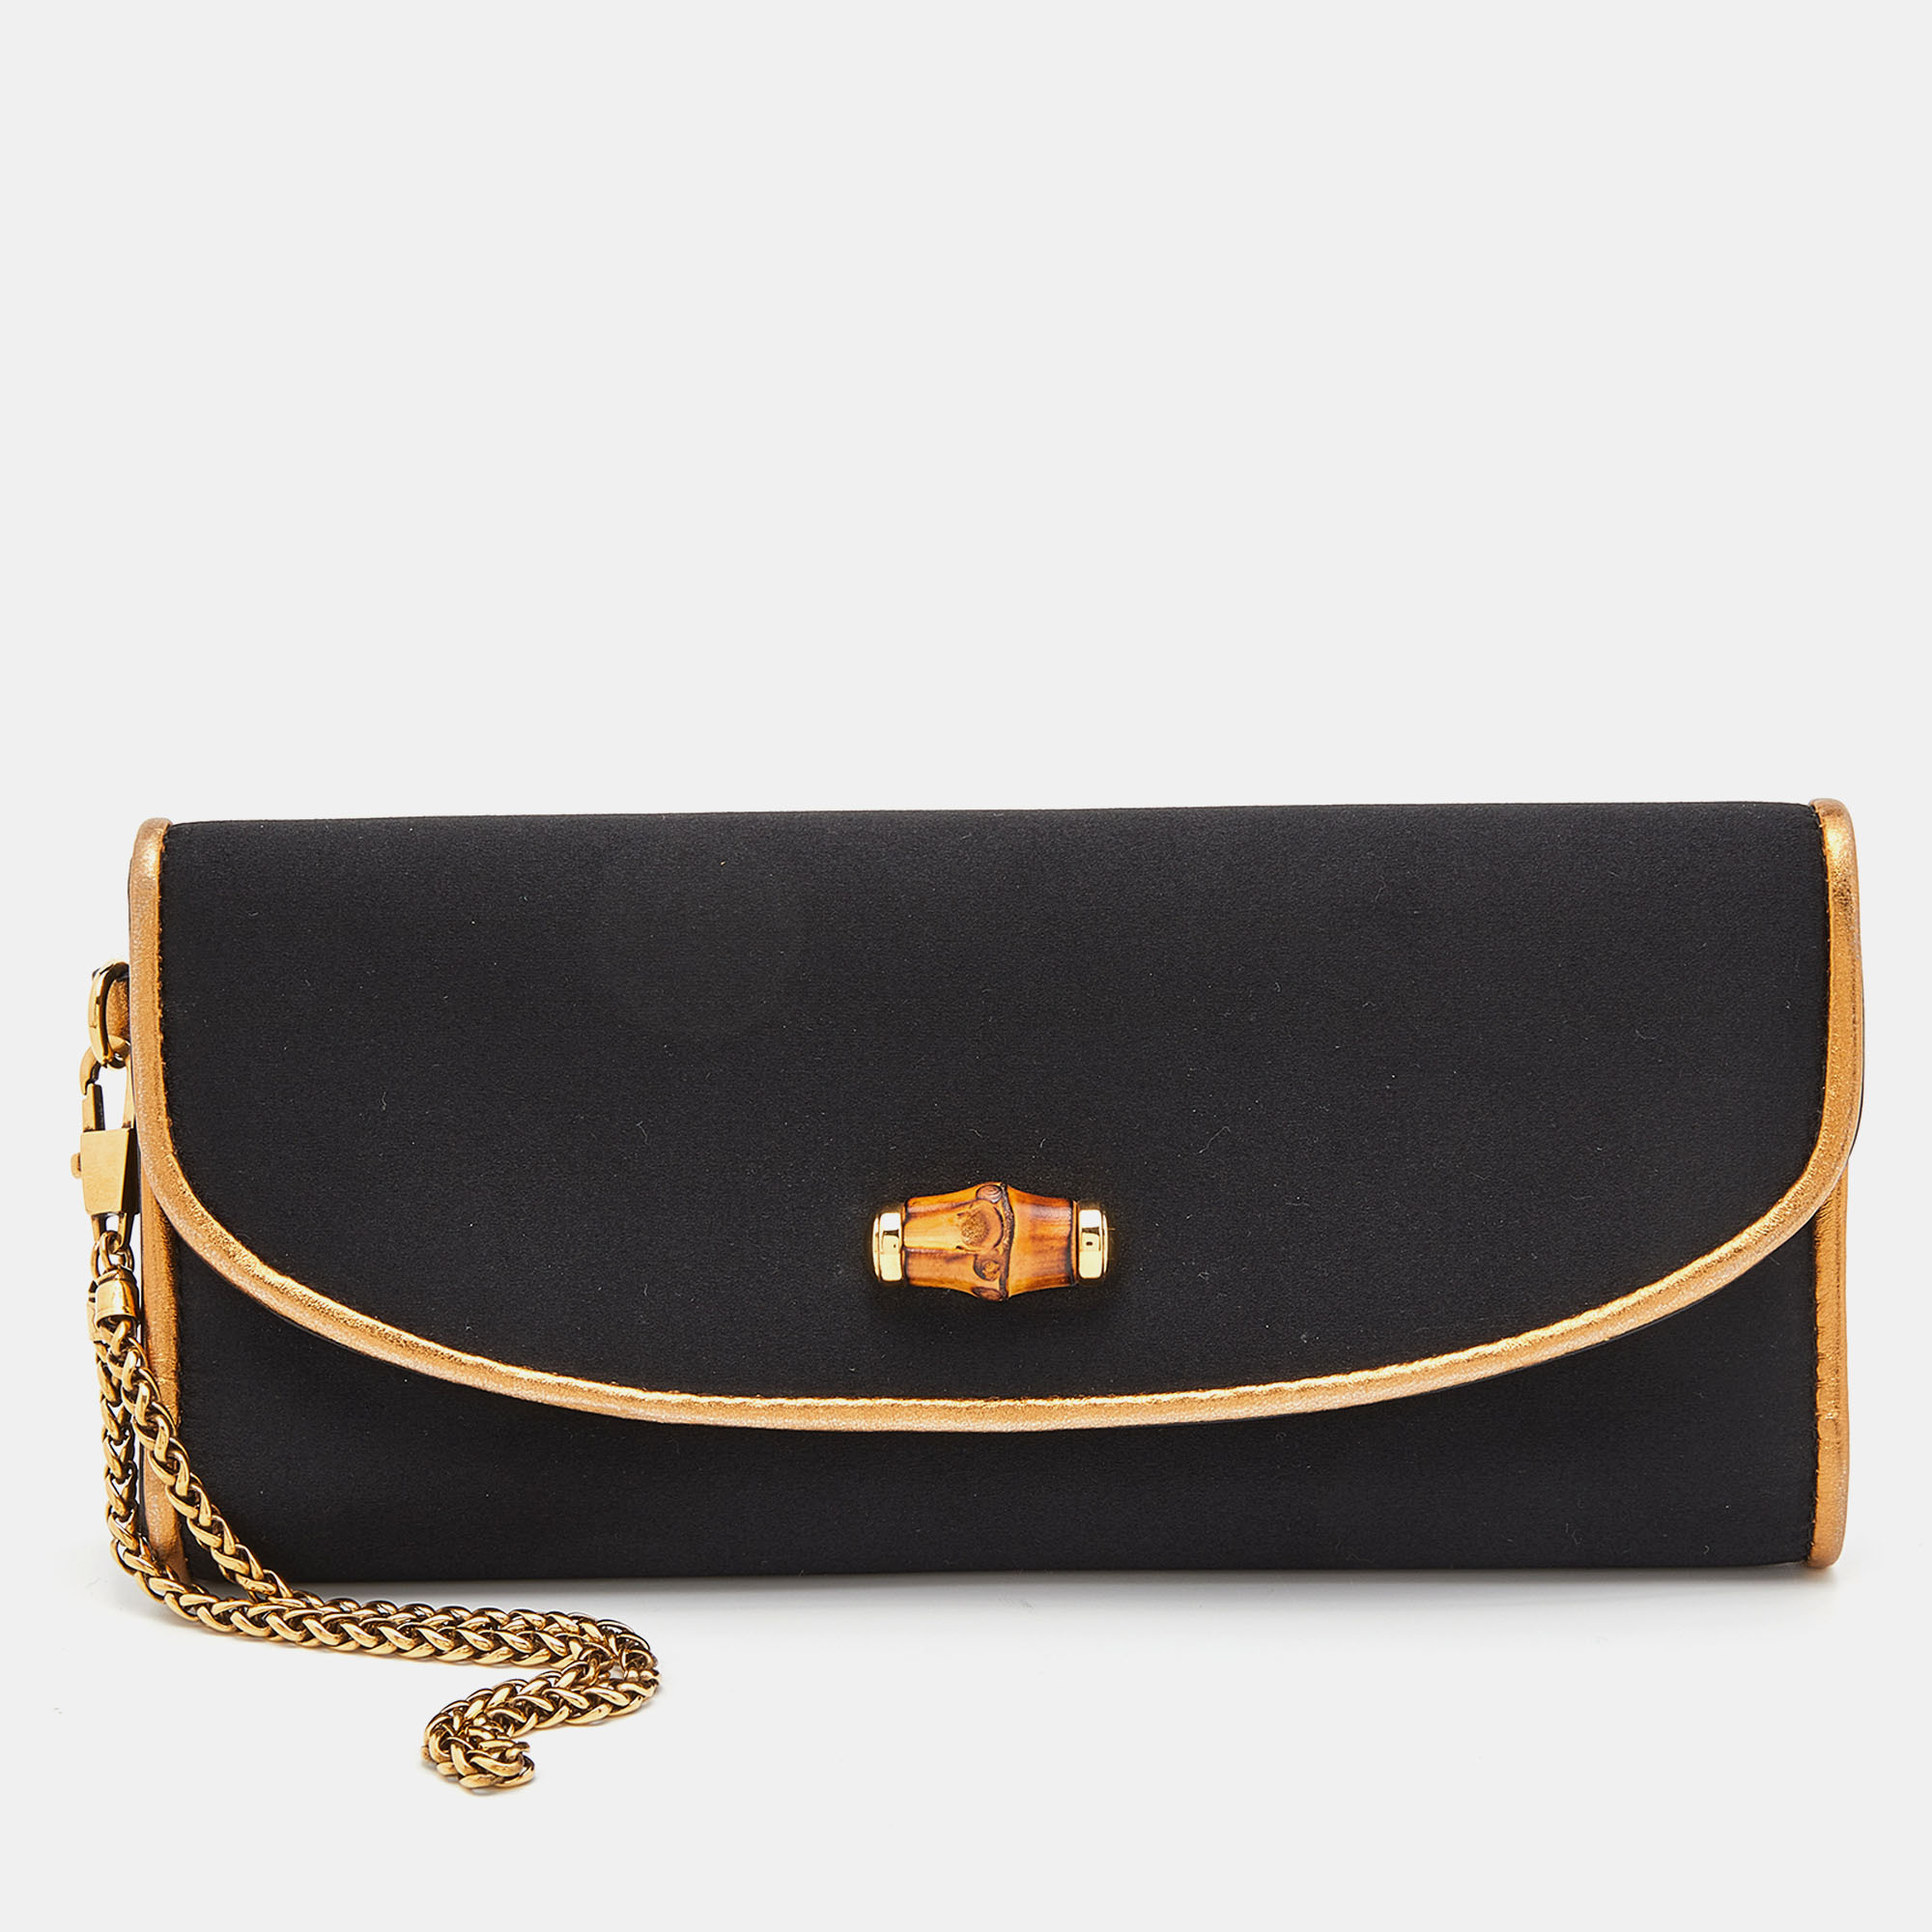 Gucci Black Satin And Leather Wristlet Clutch